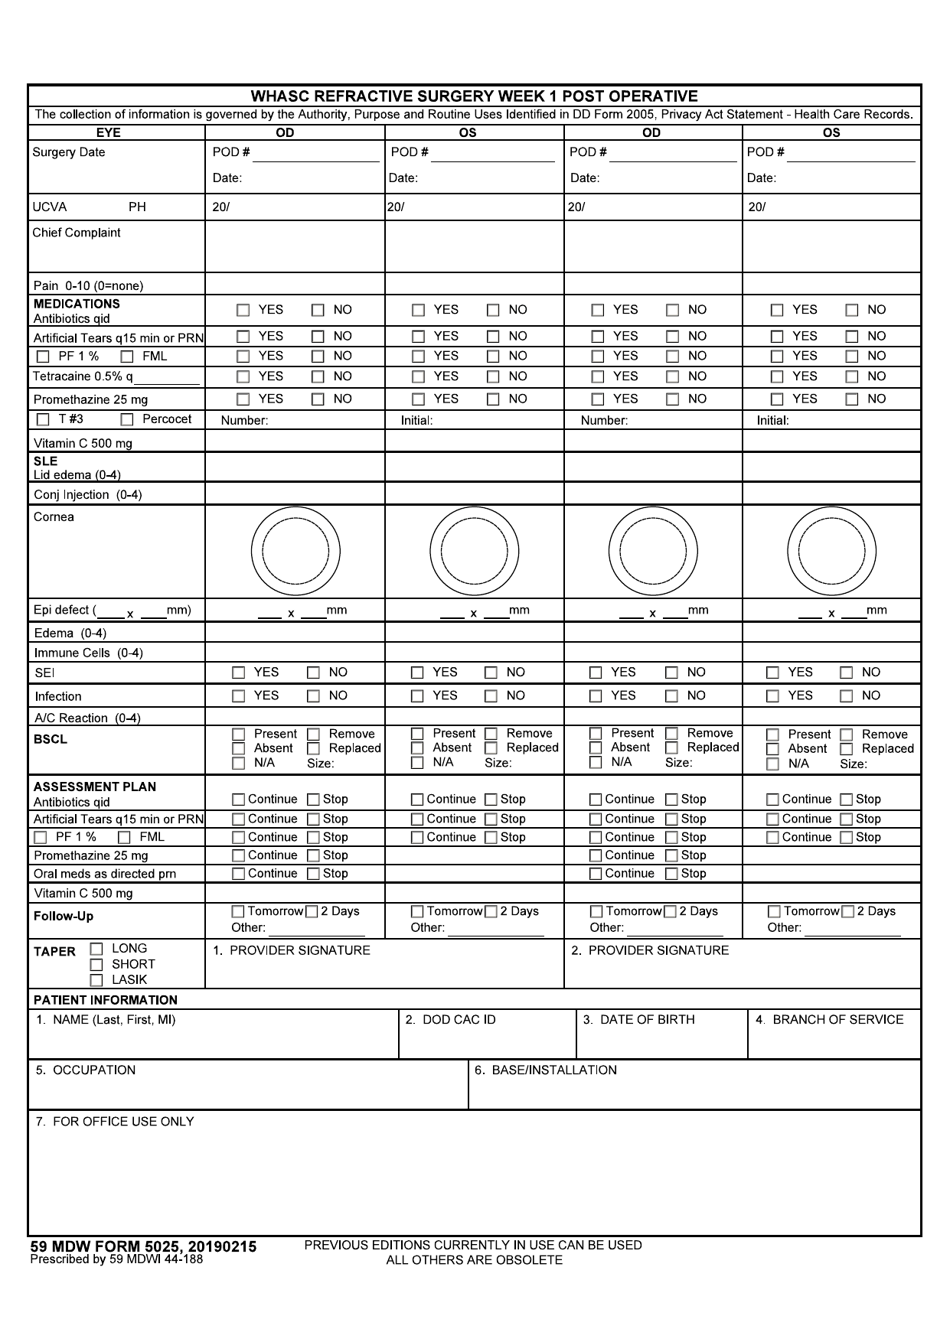 59 MDW Form 5025 Whasc Refractive Surgery Week 1 Post Operative, Page 1